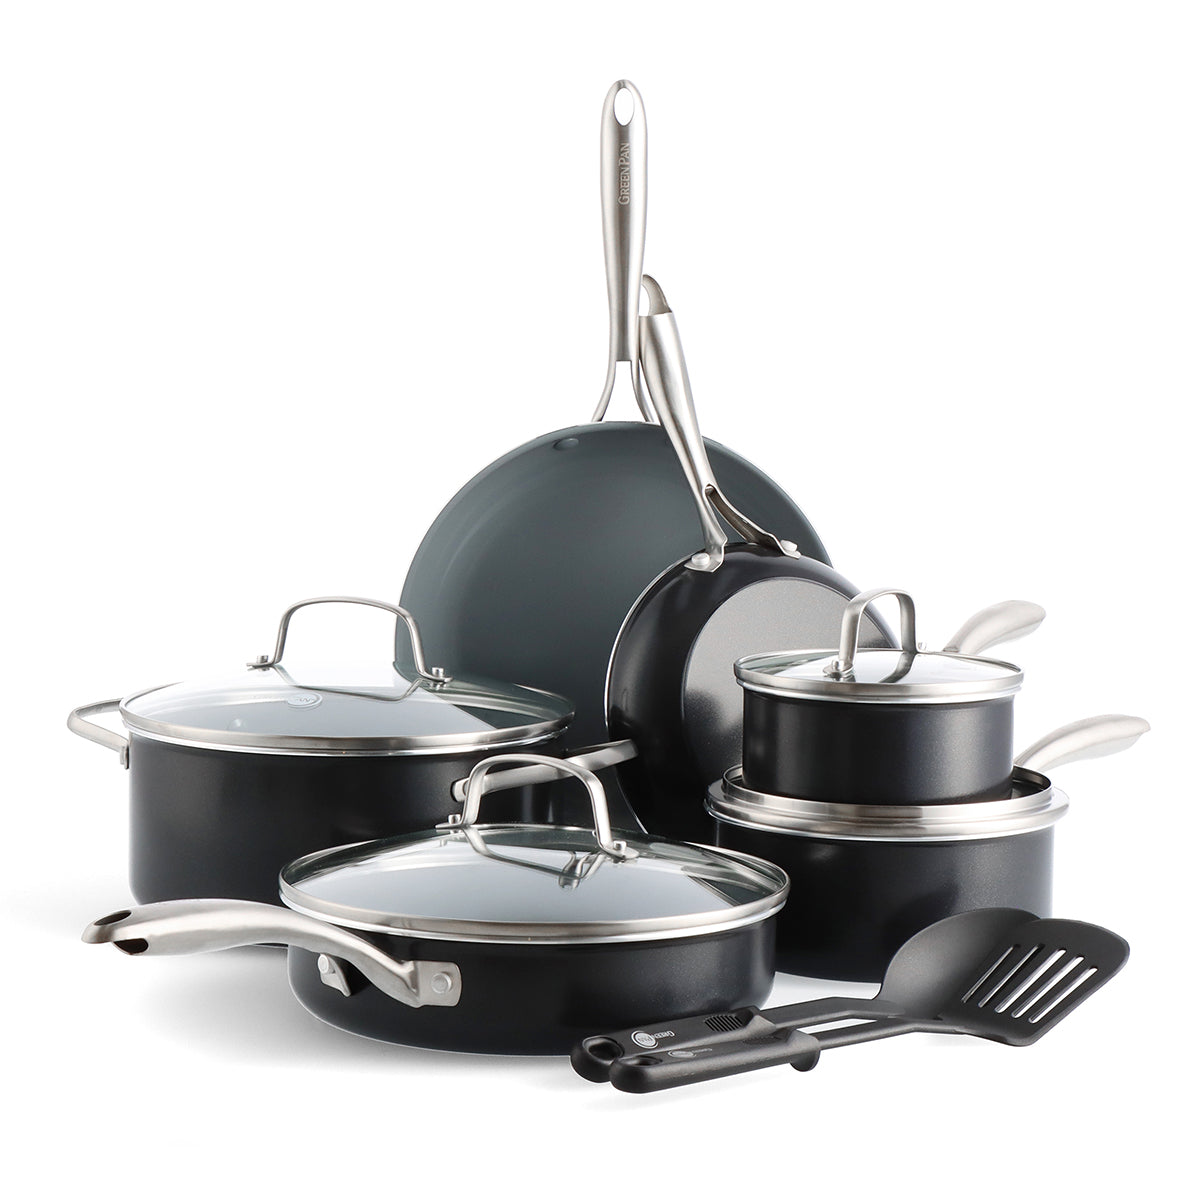 12pc Stainless Steel Cookware Set With Non-stick Coated Fry Pan